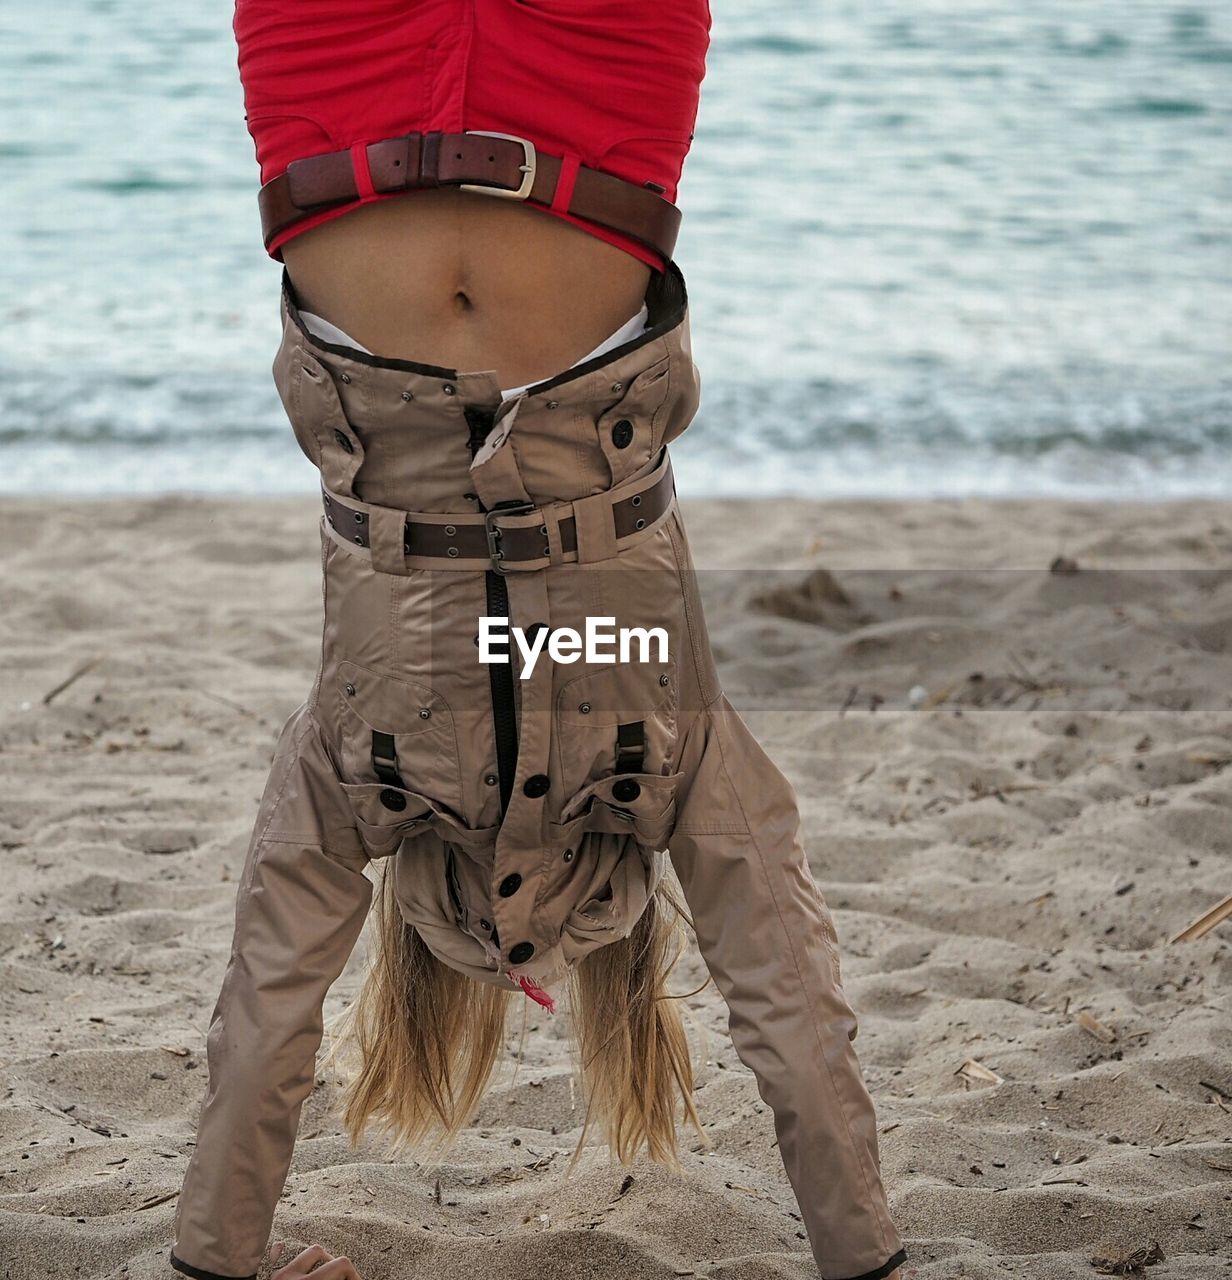 Young woman doing handstand on sand at beach